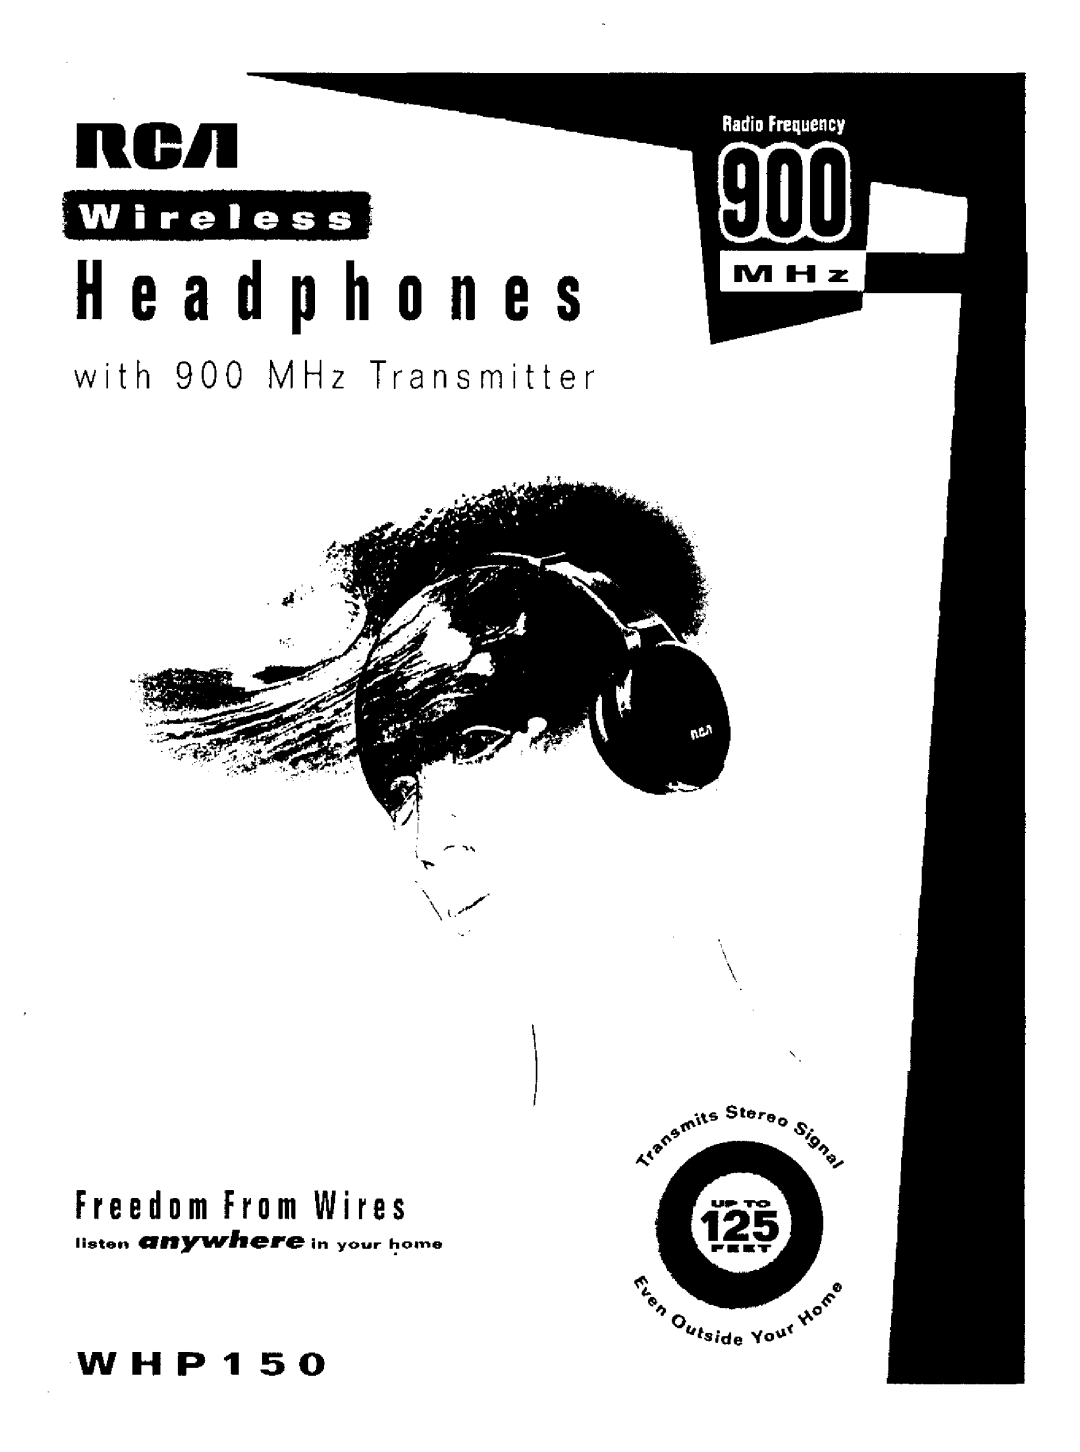 RCA WHP150 manual Freedom From Wires, Wireless, Hea d p h 0 n es, ROil, with 900 MHz Transmitter, listen anYfherein your 